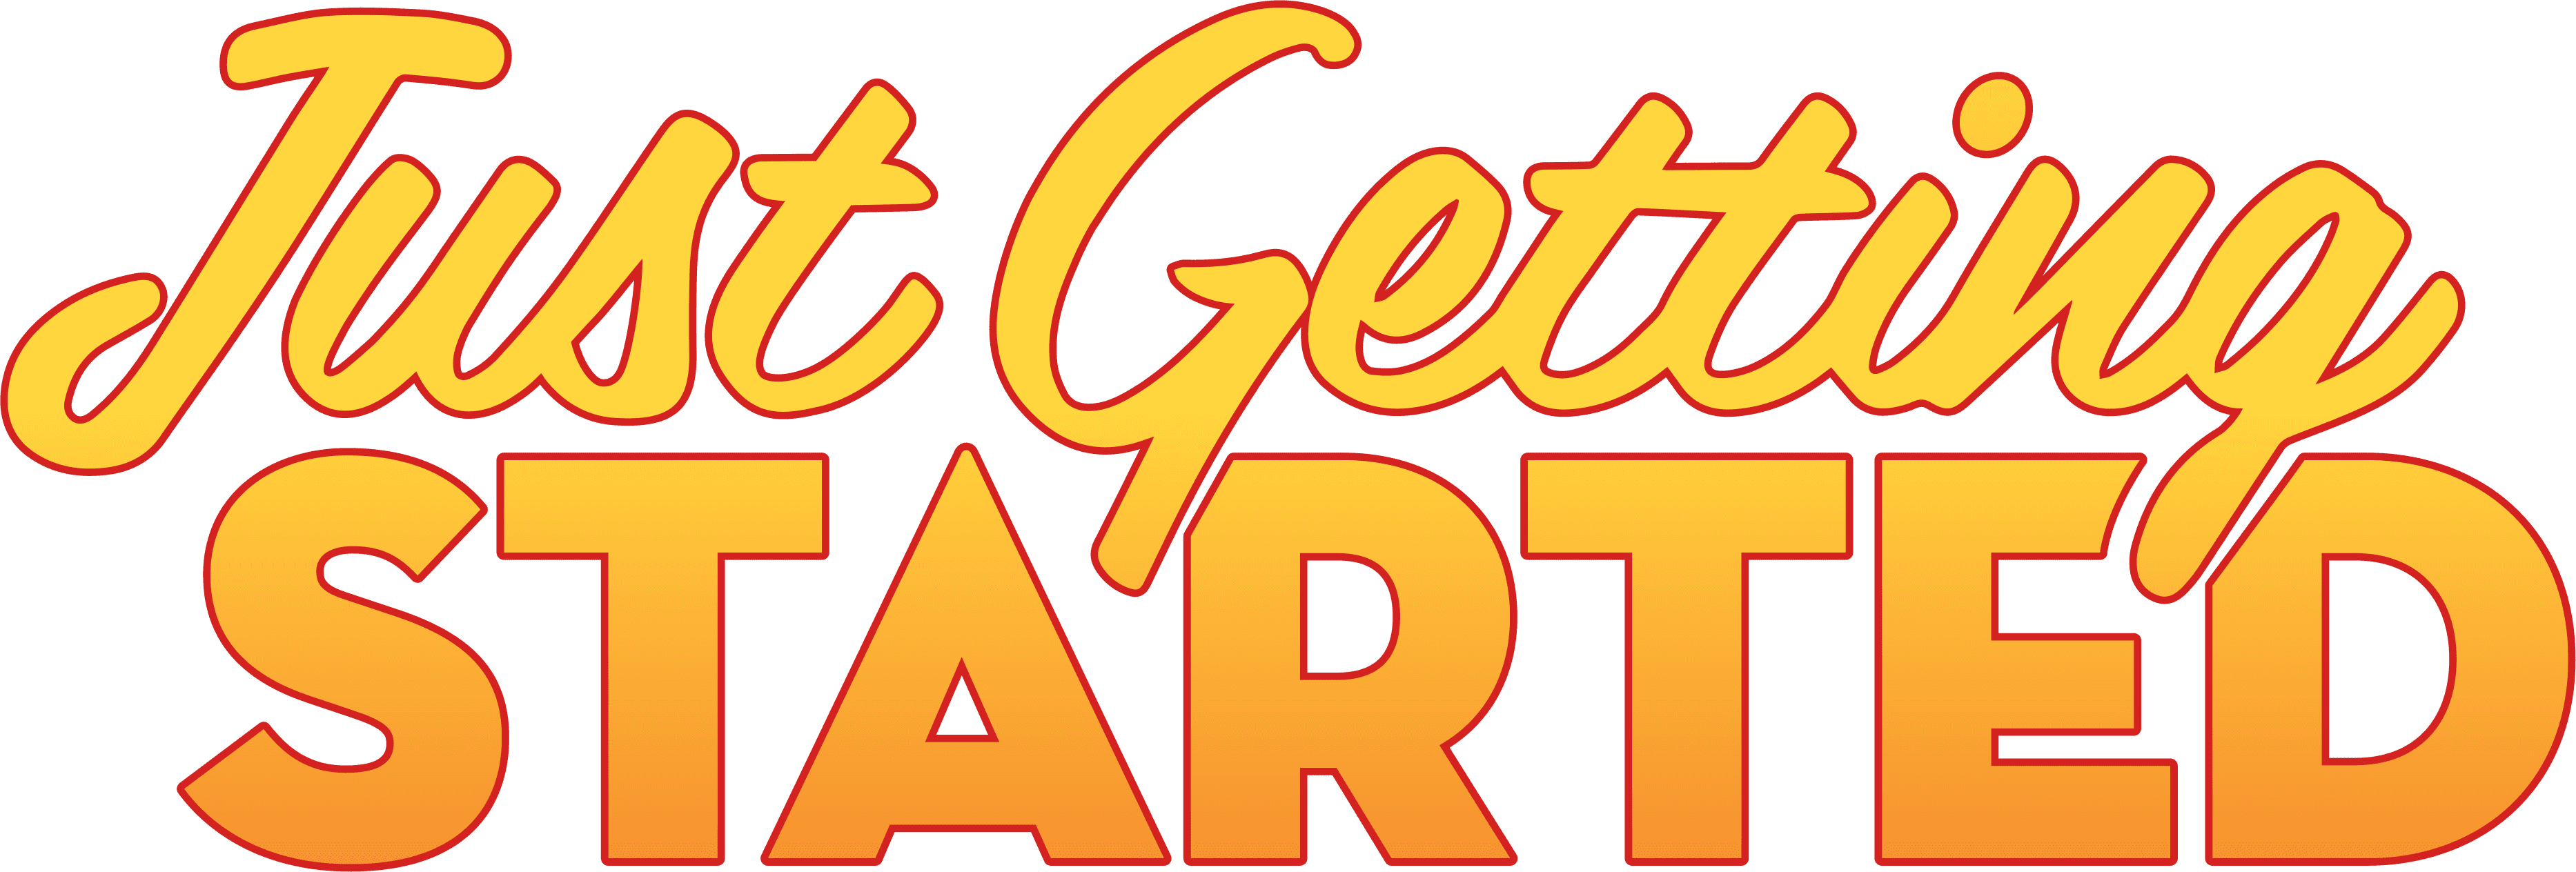 Just Getting Started logo